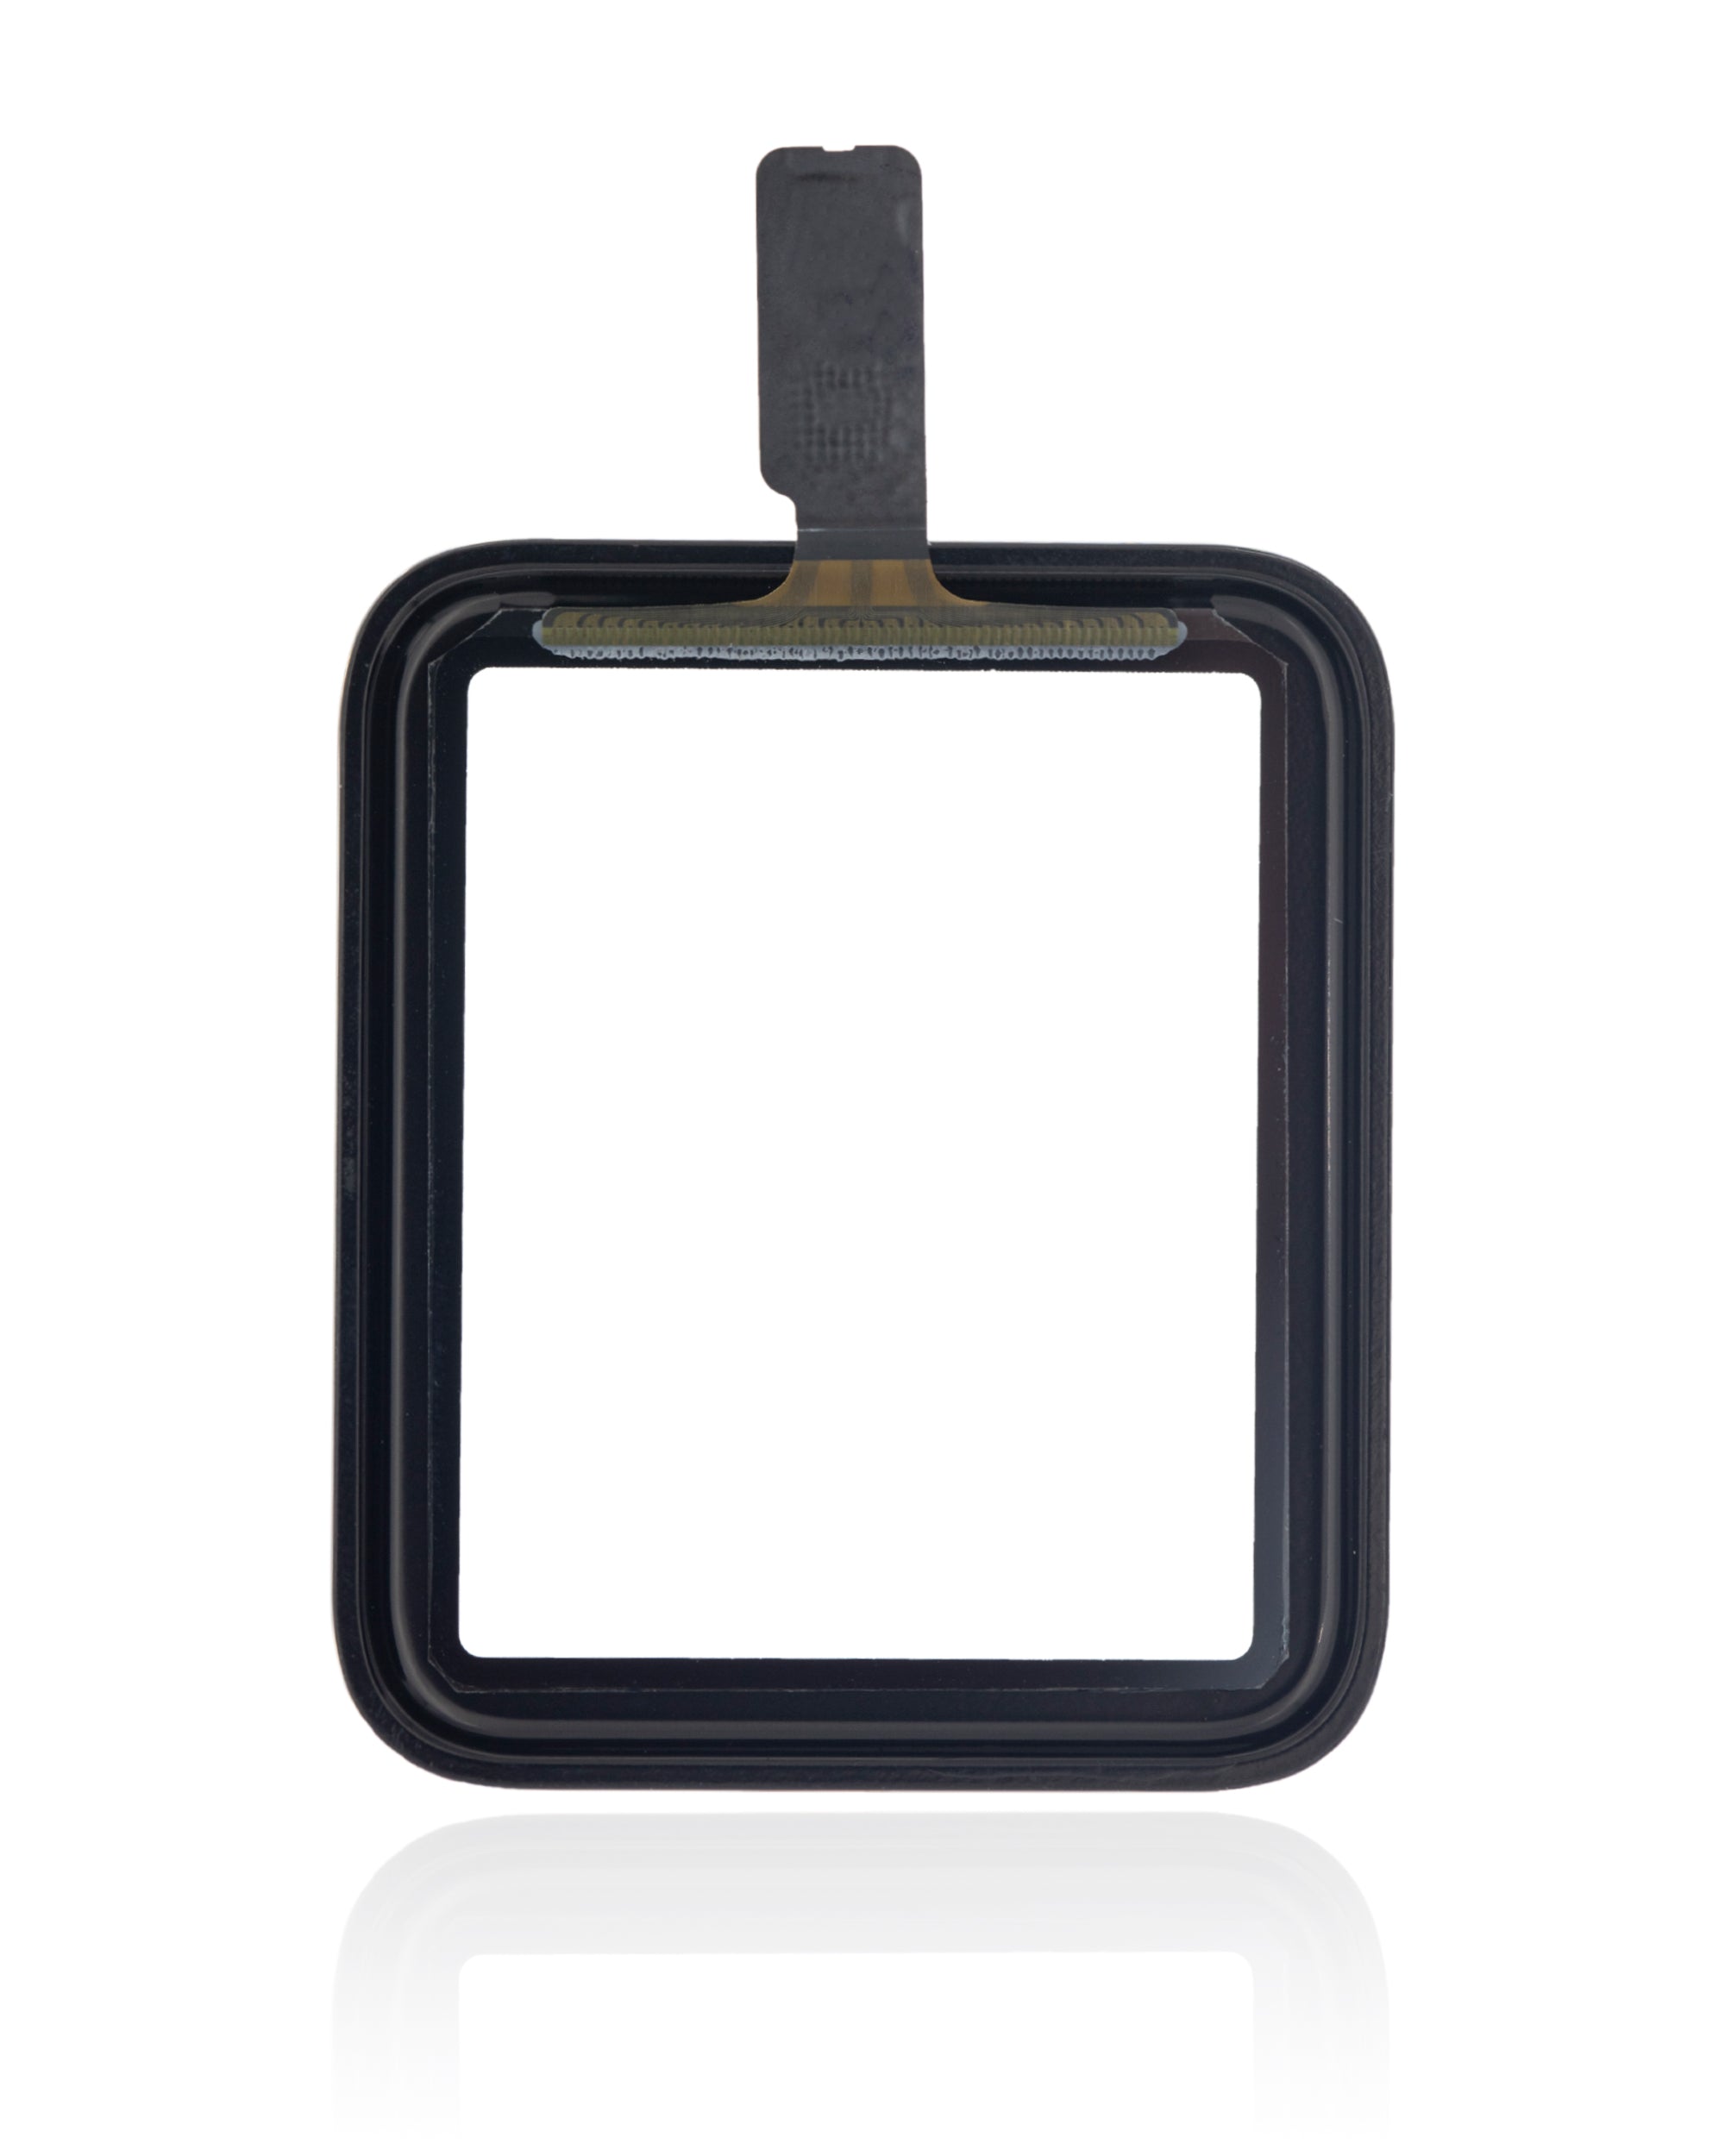 For Watch Series 2 / 3 (42MM) Digitizer Glass Replacement (Glass Separation Required)